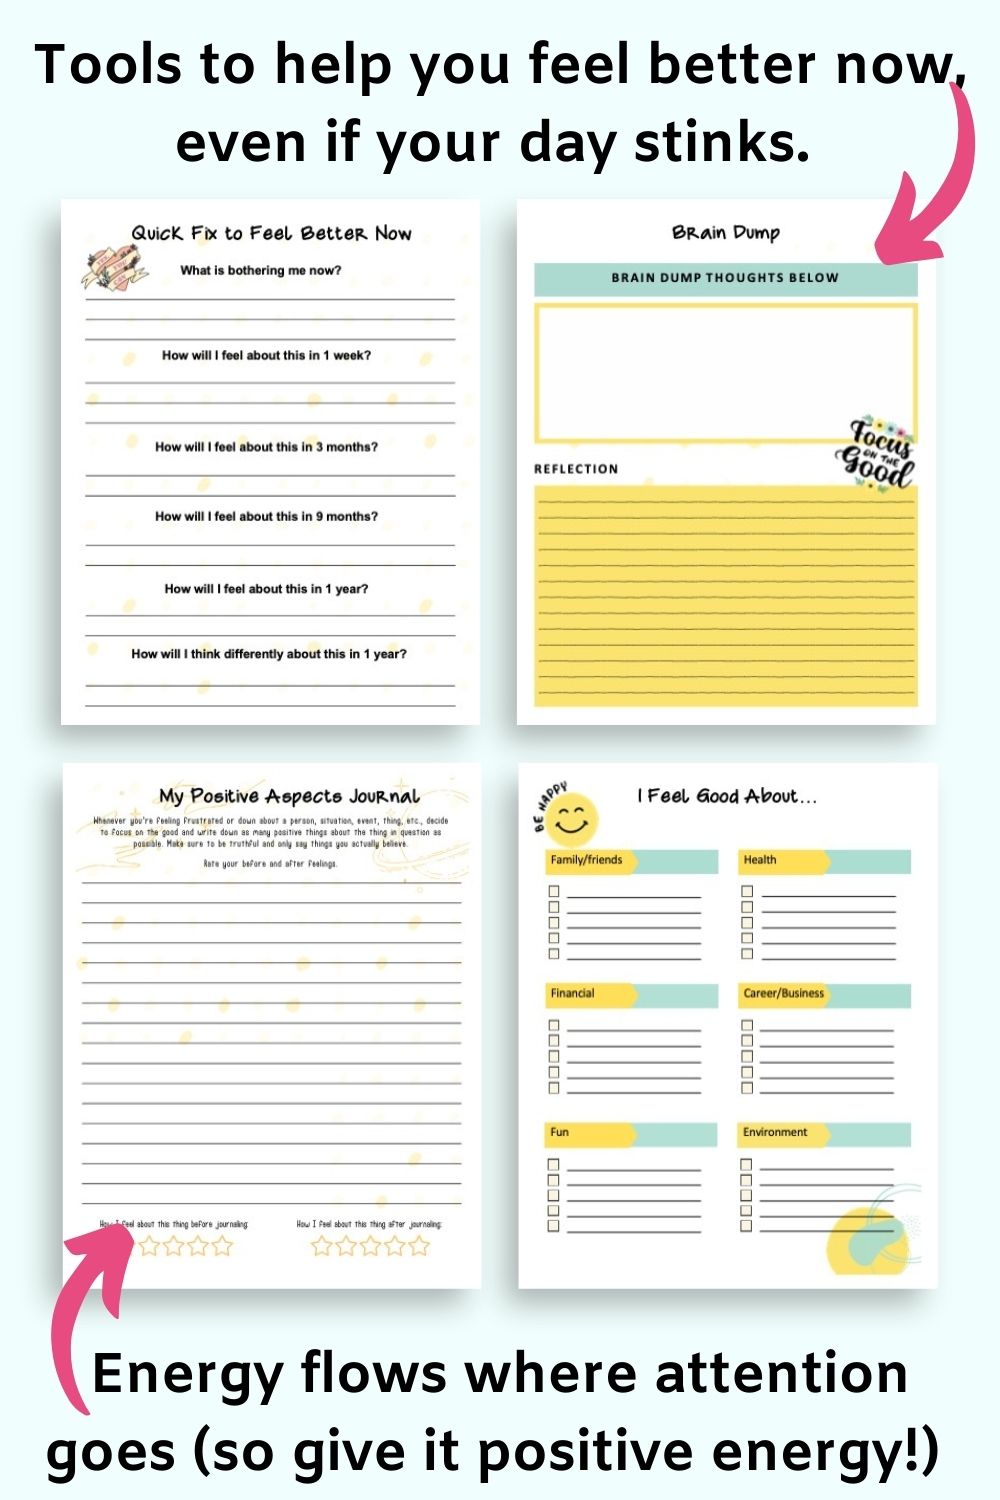 Text "tools to help you feel better now, even if your day stinks" and "energy flows where attention goes (so give it positive energy!)" with a preview of four printable planner pages: quick fix to feel better now, brain dump, my positive aspects journal, and I feel good about...